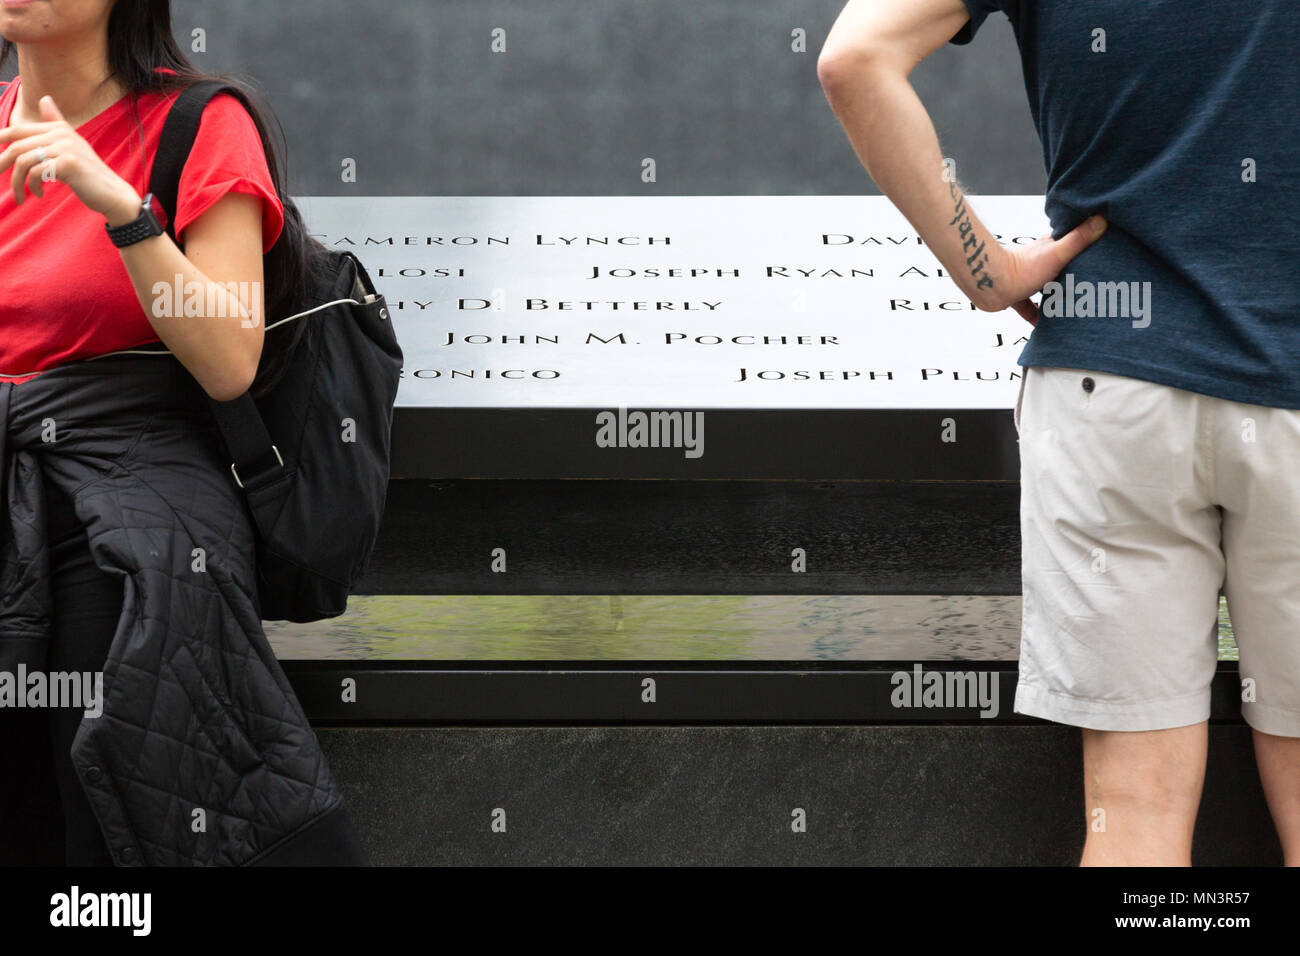 People standing at the 9-11 Memorial pools, National September 11 memorial and museum, New York city, USA Stock Photo